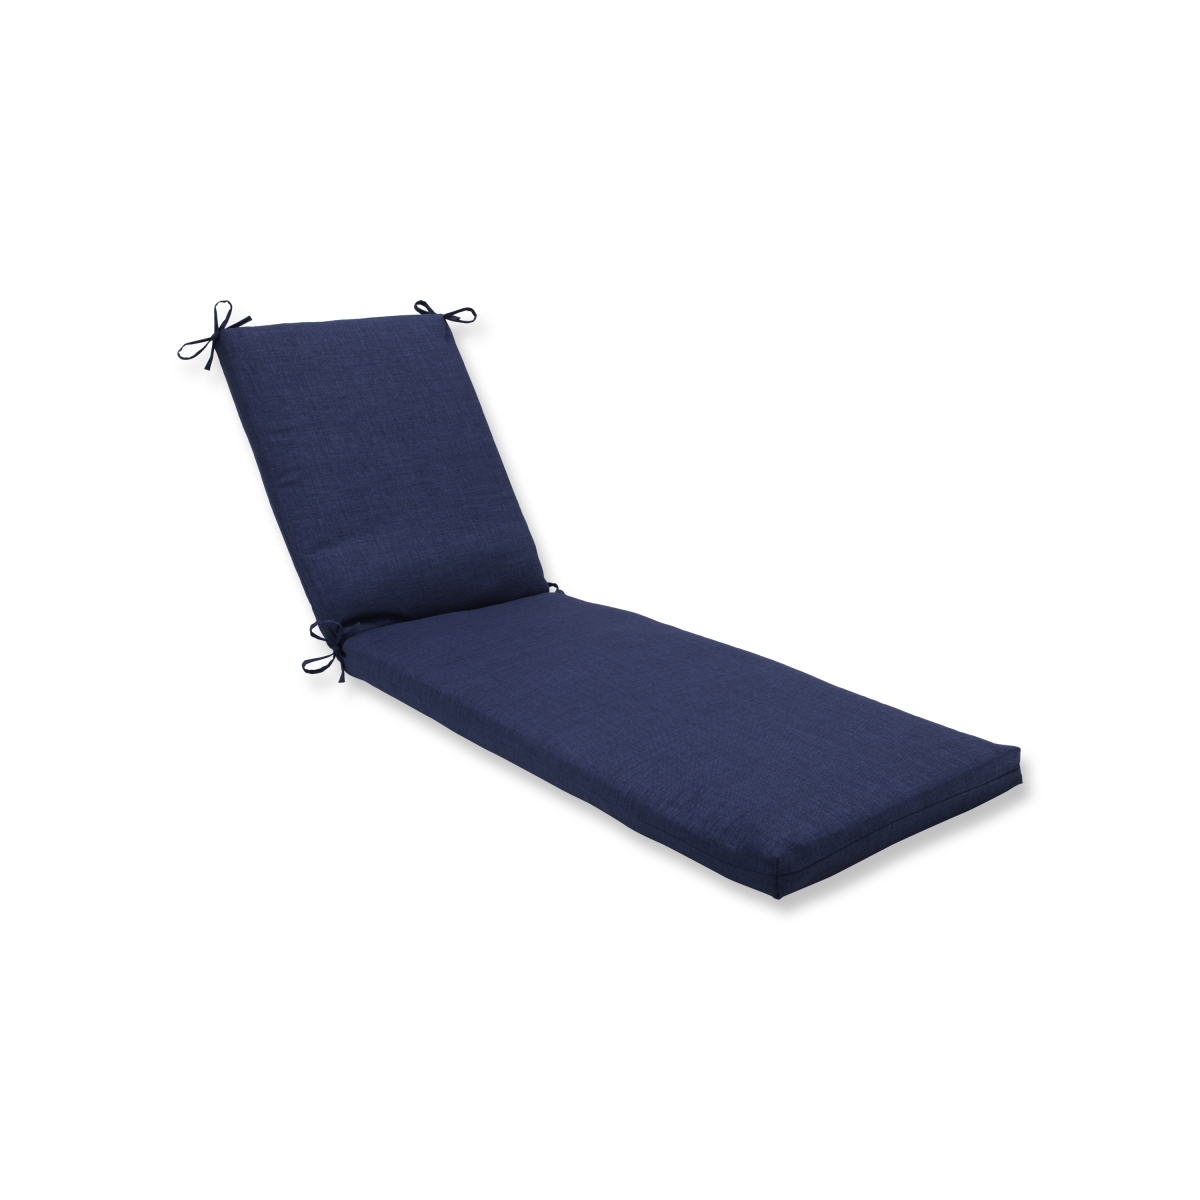 80 X 23 X 3 In. Outdoor & Indoor Rave Indigo Chaise Lounge Cushion, Blue